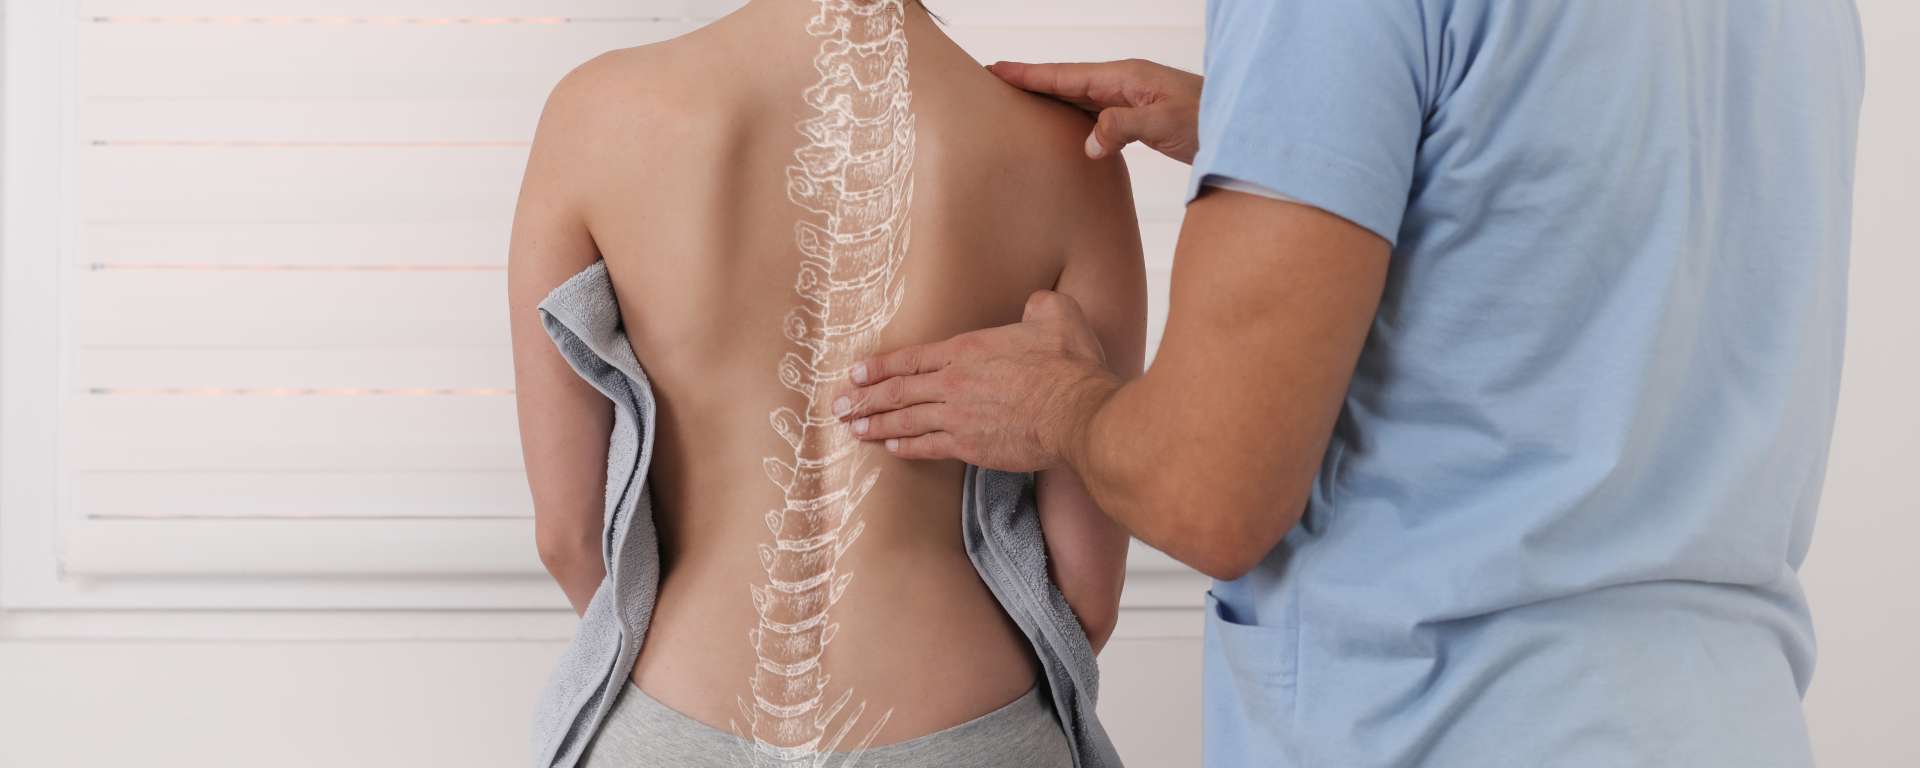 Physio, chiro or osteo Health professional looking at a patient's back with graphic of spine superimposed